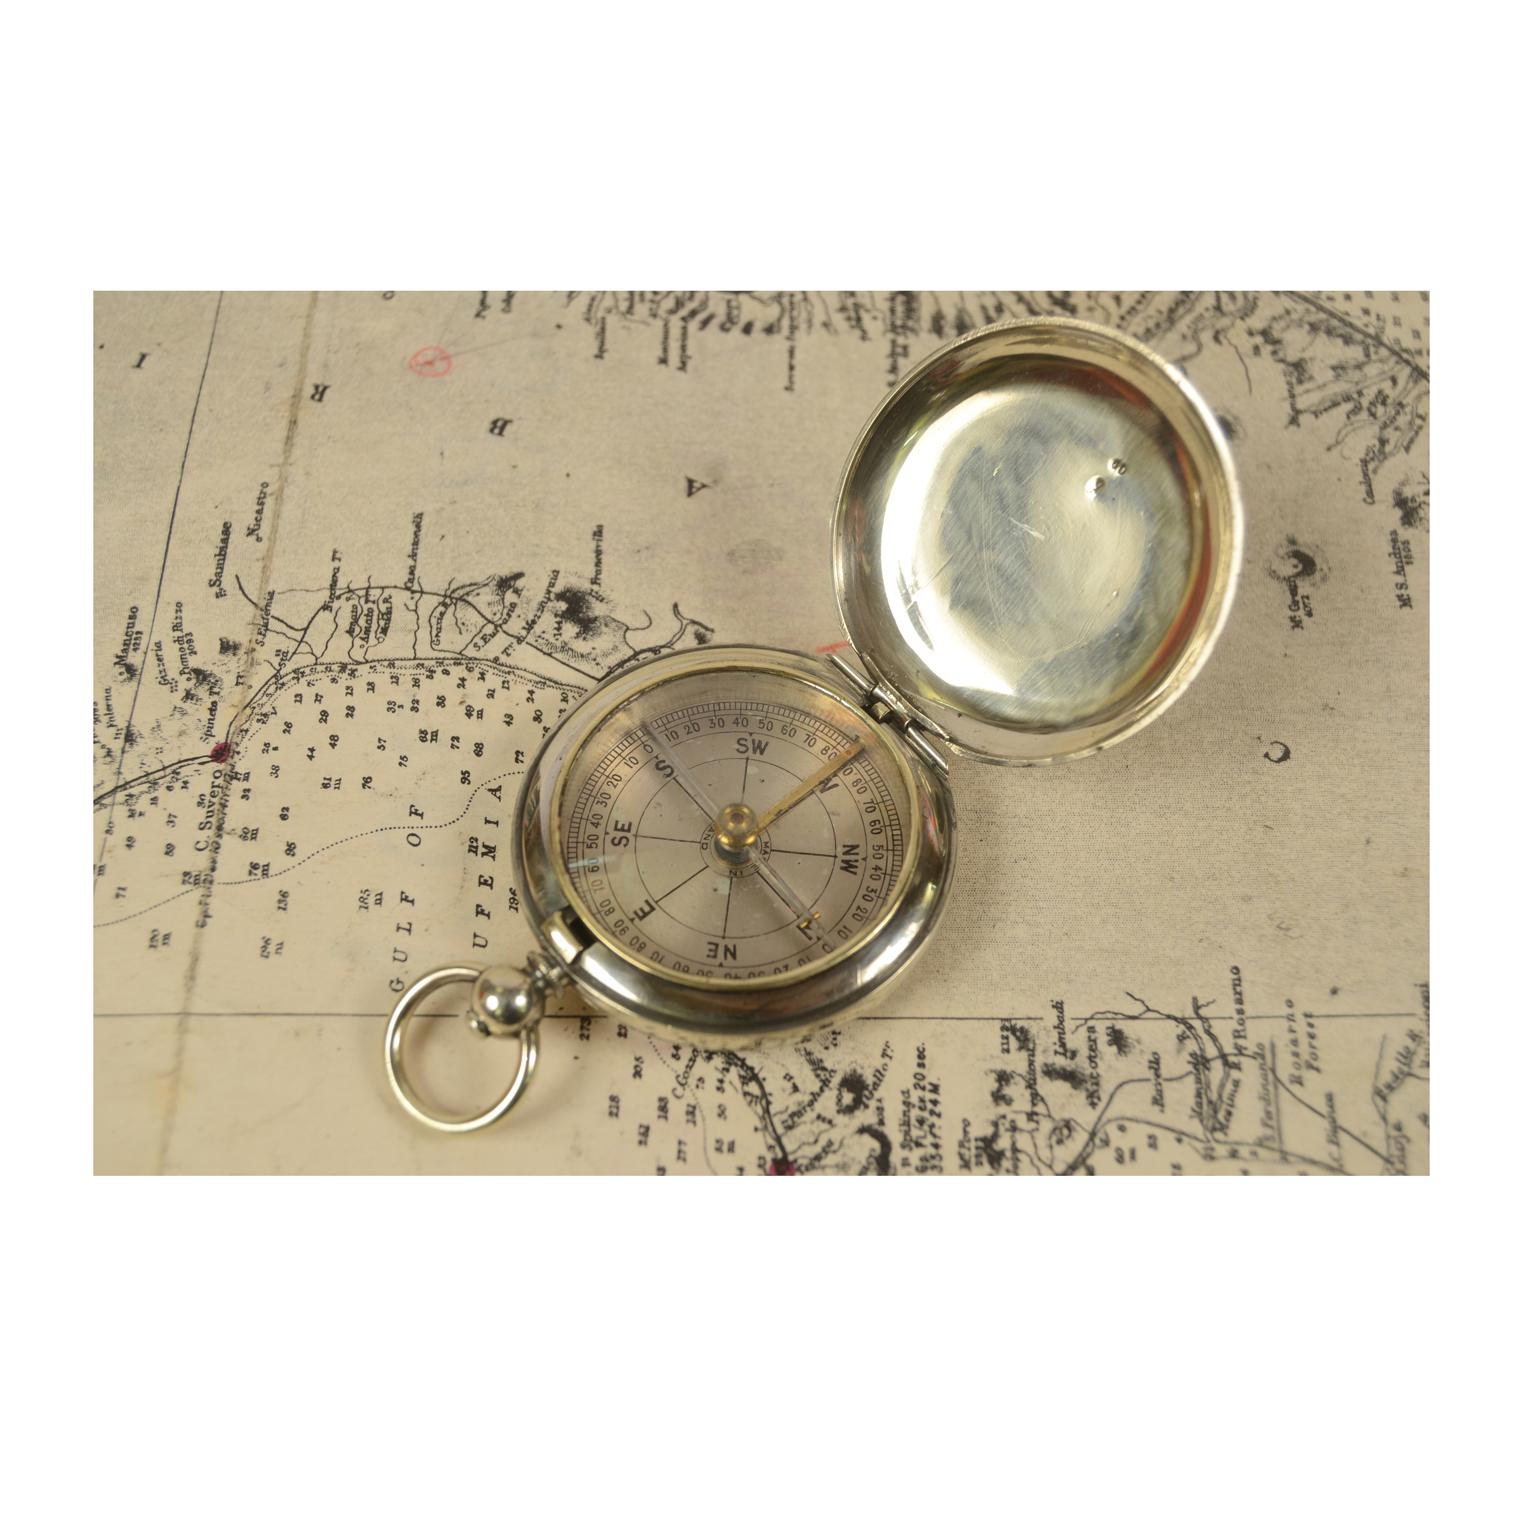 Officer's pocket compass of chromed brass in the shape of a pocket watch. English manufacture from the early 1900s. The compass is equipped with a lid with snap closure with release button inside the ring. Six-wind compass card complete with